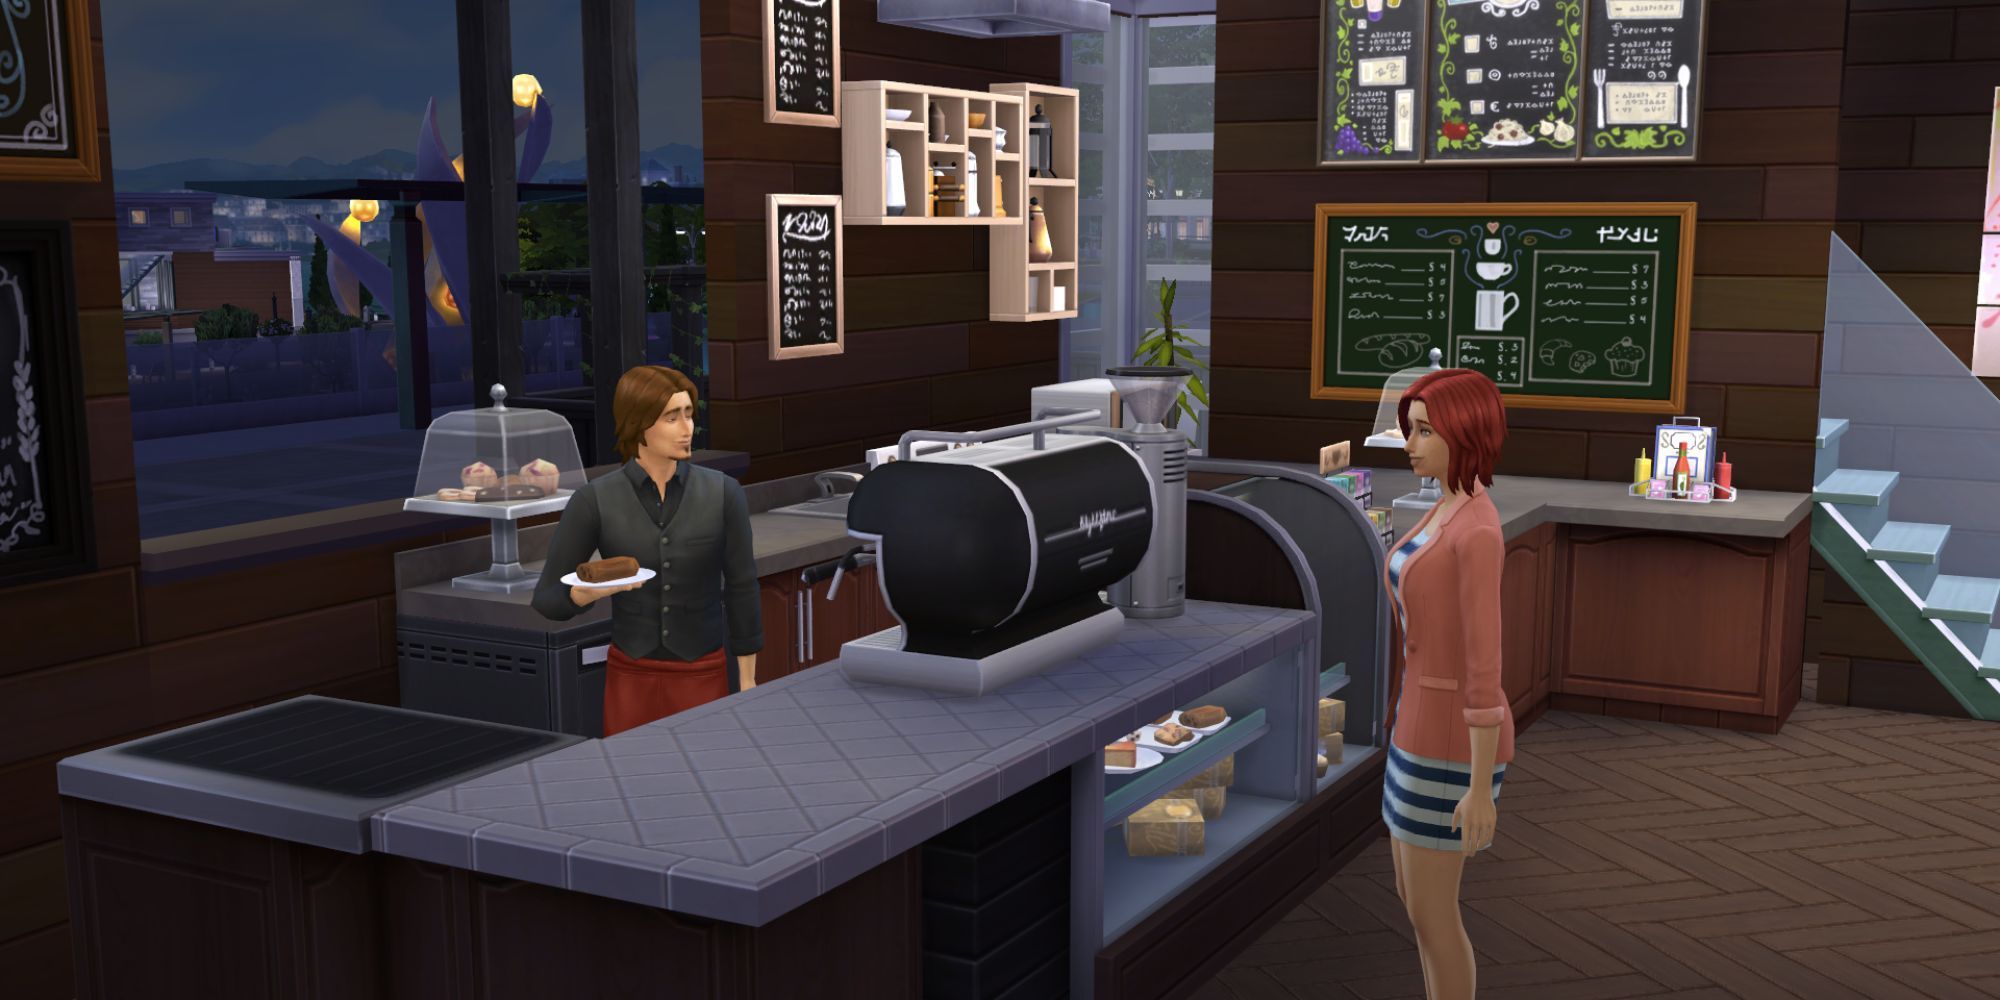 The Sims 4 Cafe